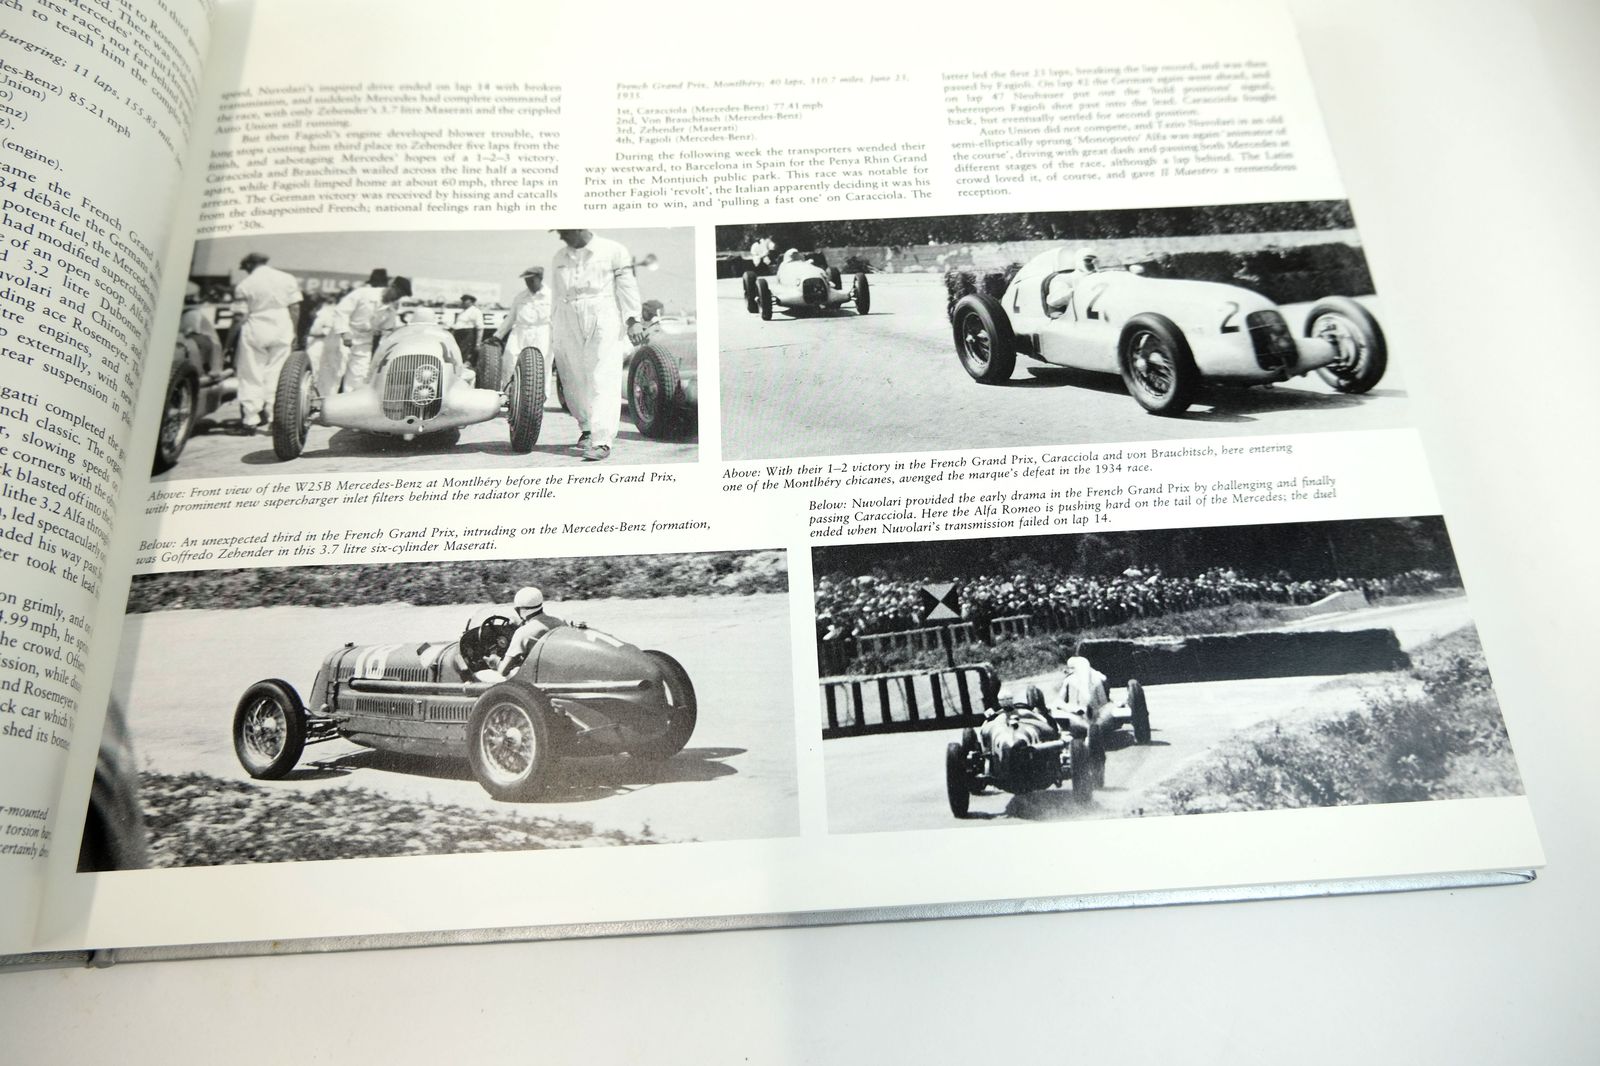 Photo of MERCEDES-BENZ GRAND PRIX RACING 1934 - 1955 written by Monkhouse, George published by White Mouse (STOCK CODE: 1818704)  for sale by Stella & Rose's Books